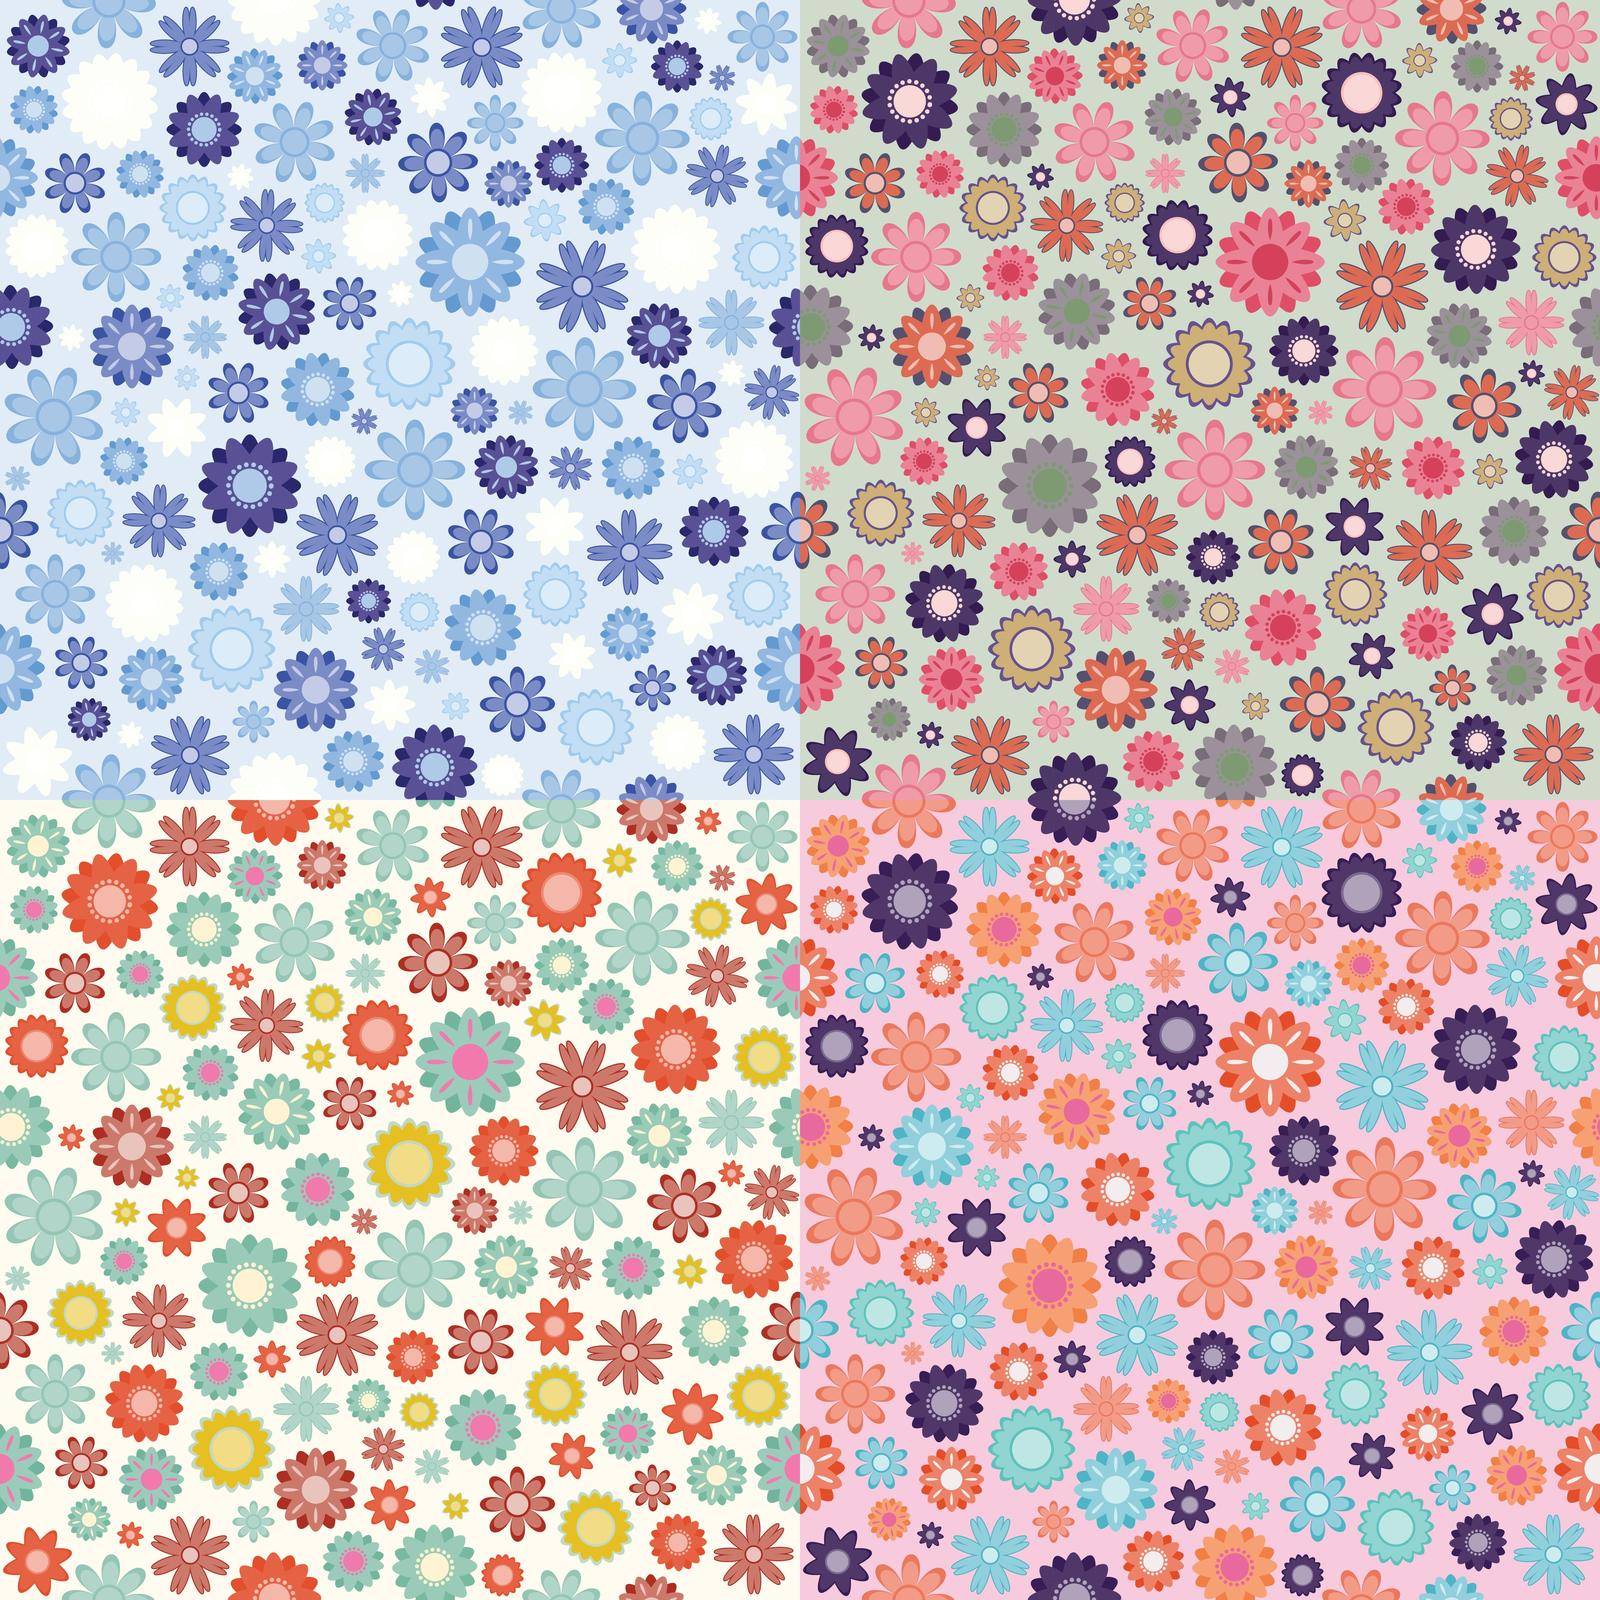 Seamless pattern with traditional floral ornament. Vector illustration.